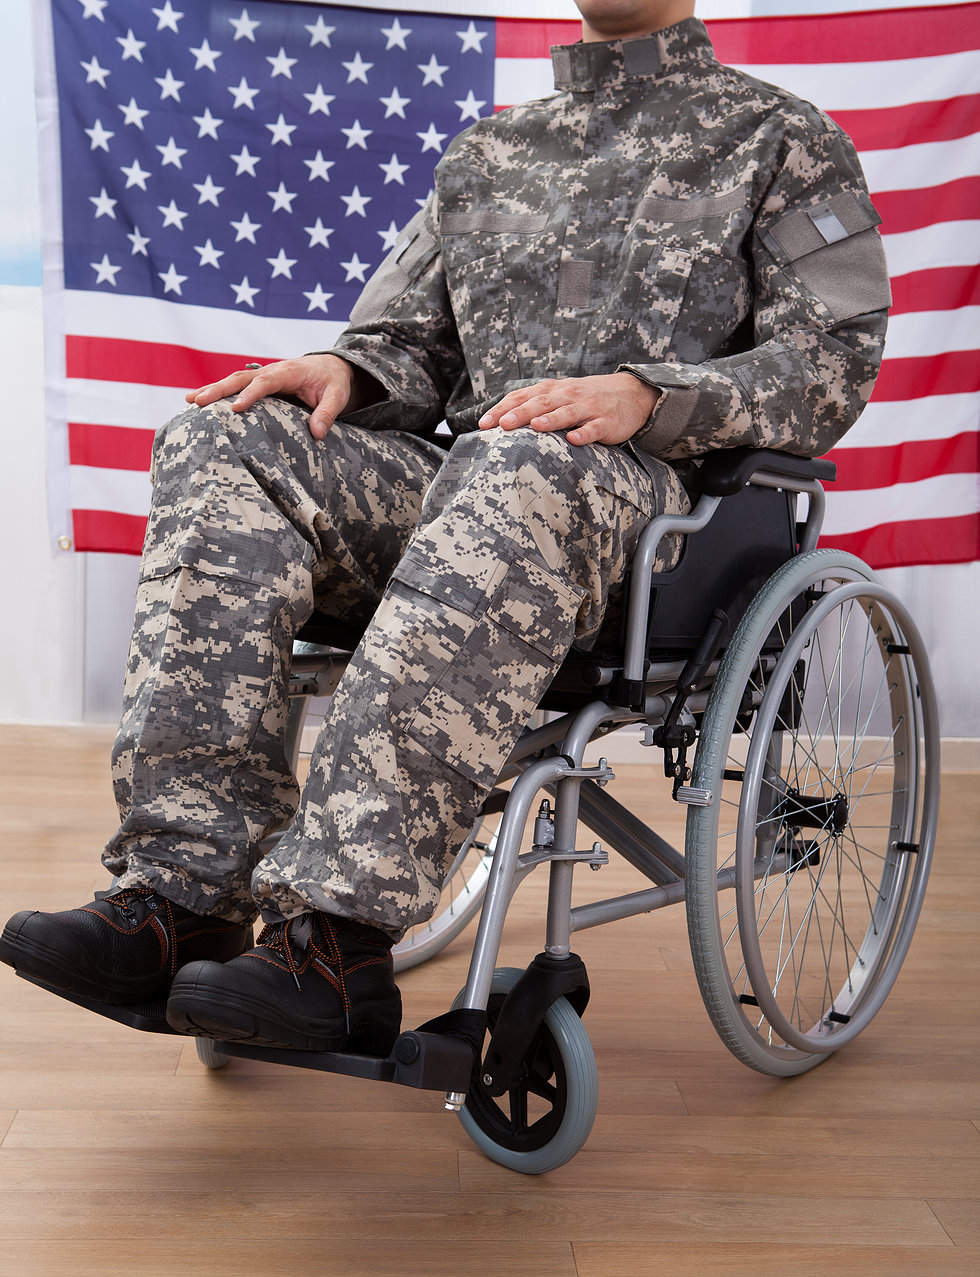 Financial Assistance for Veterans in Texas